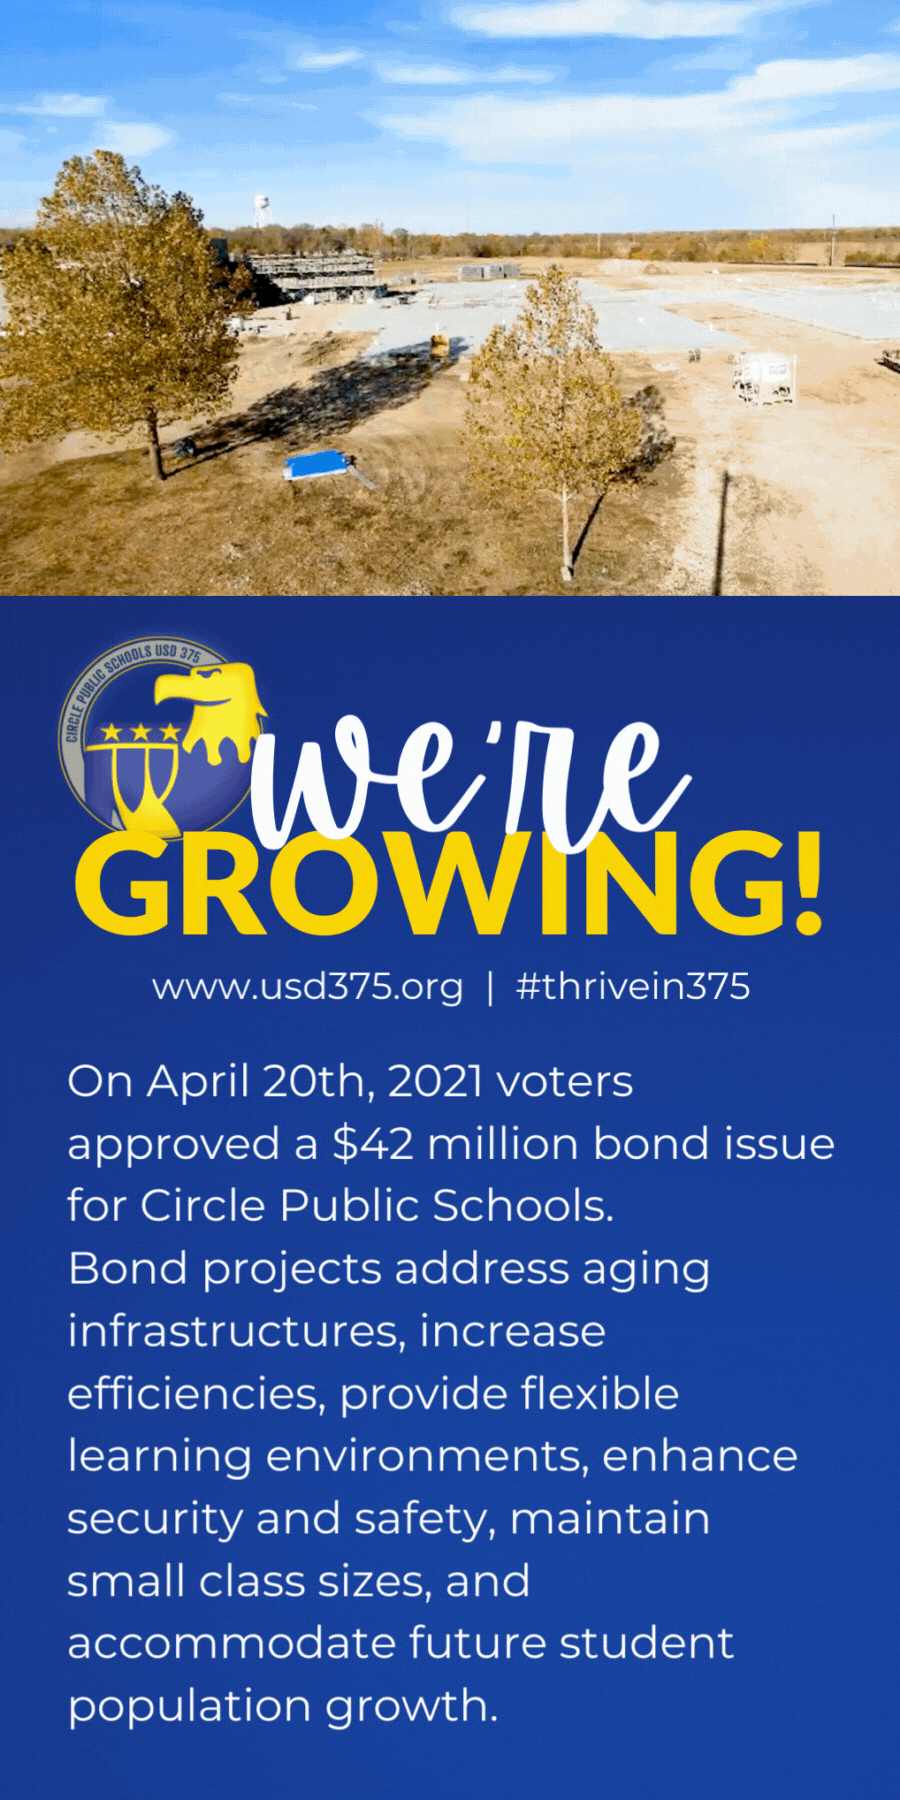 We're Growing Gif:On April 20th, 2021 voters approved a $42 million bond issue for Circle Public Schools.  Bond projects address aging infrastructures, increase efficiencies, provide flexible learning environments, enhance security and safety, maintain small class sizes, and accommodate future student population growth.